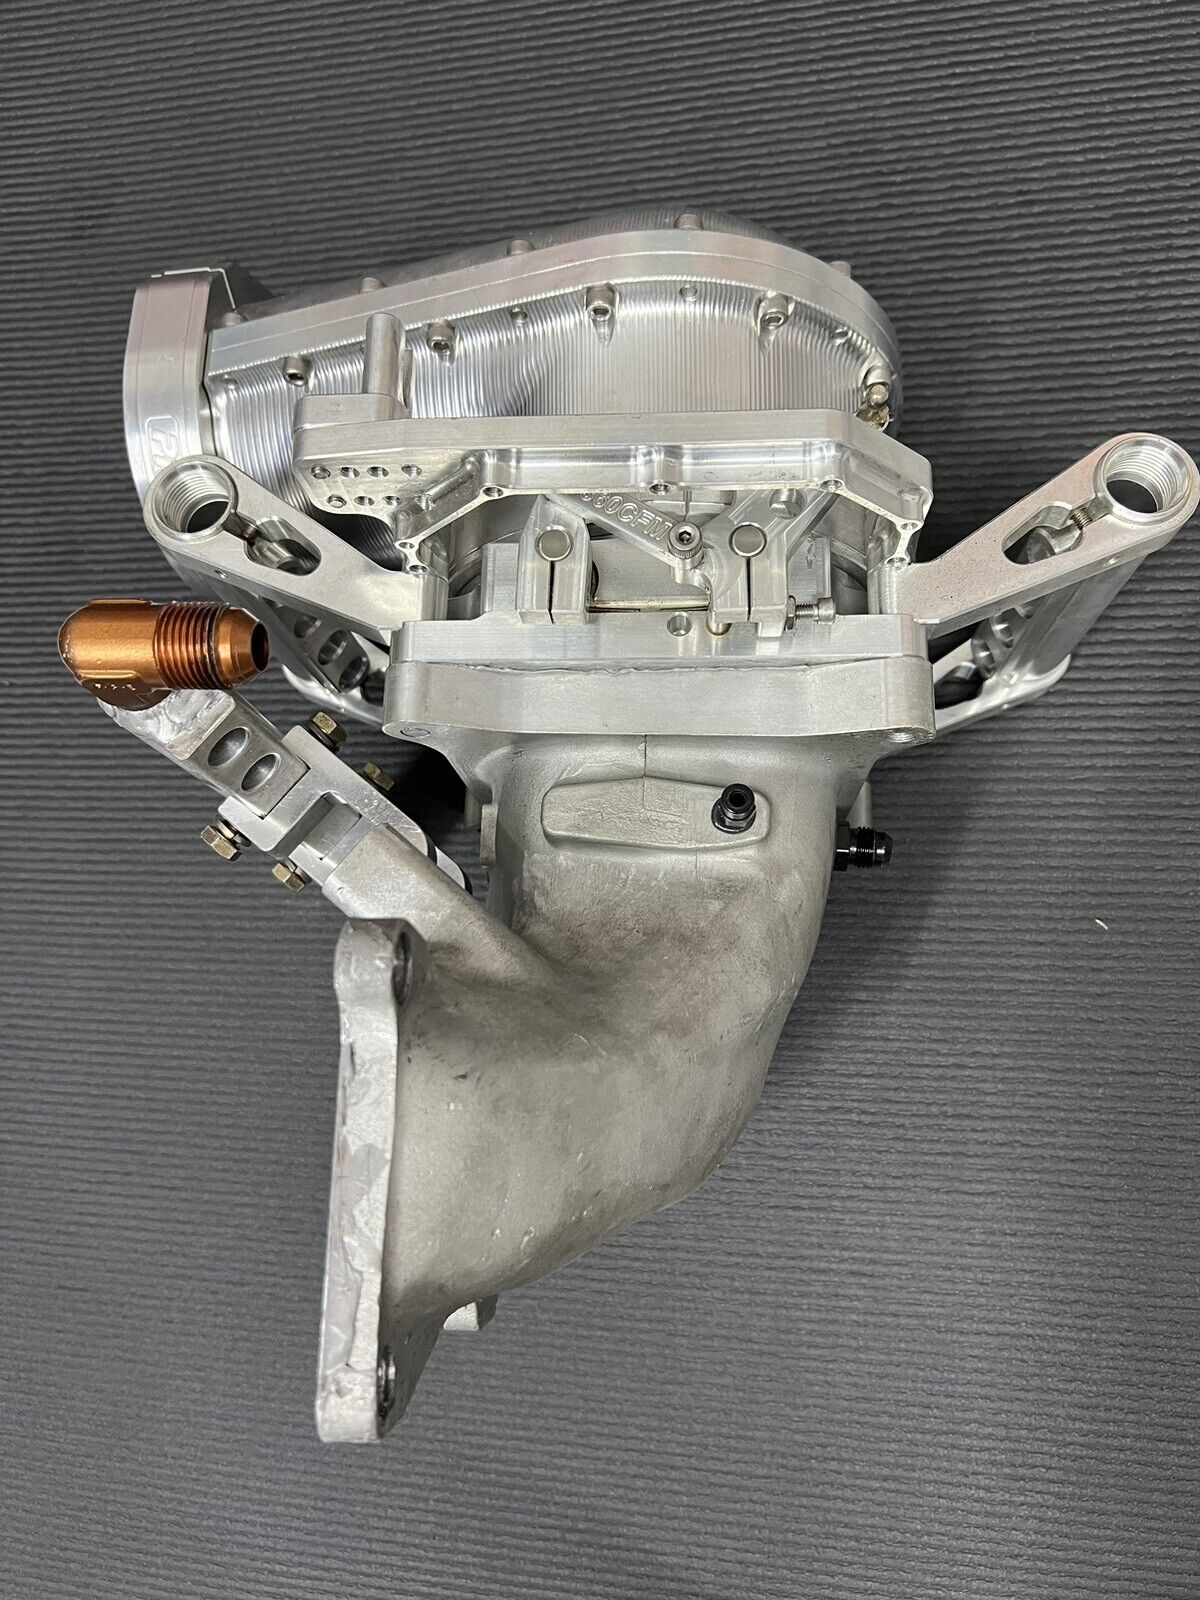 Pro  Jay Bully 8 Injector Throttle Body & Intake Manifold With Extra 4 Injector